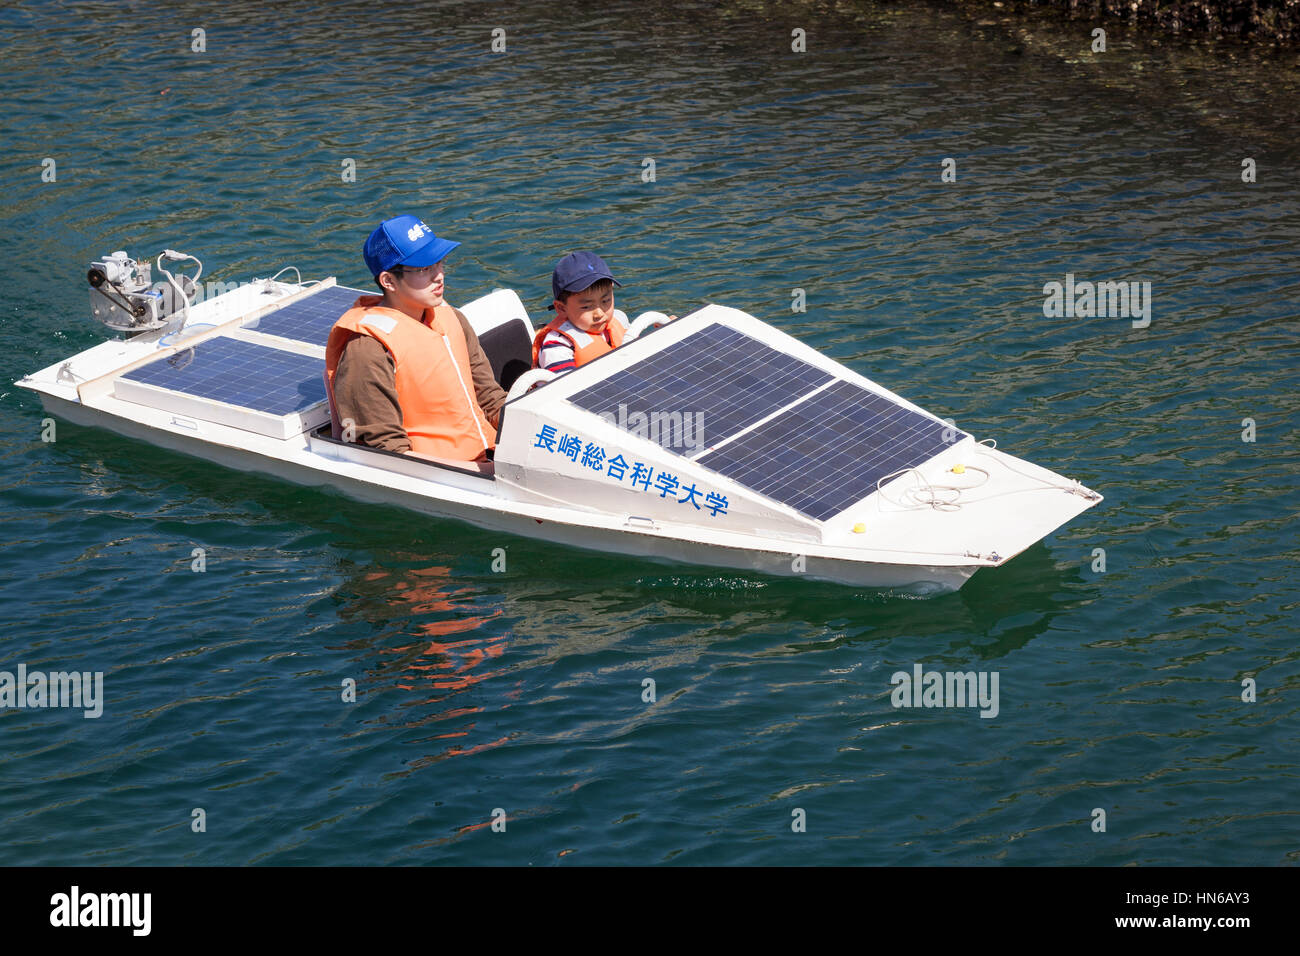 Nagasaki, Japan - April 28, 2012: A man and young boy sail a small solar powered boat on a calm waterway at Nagasaki waterfront. Children were allowed Stock Photo